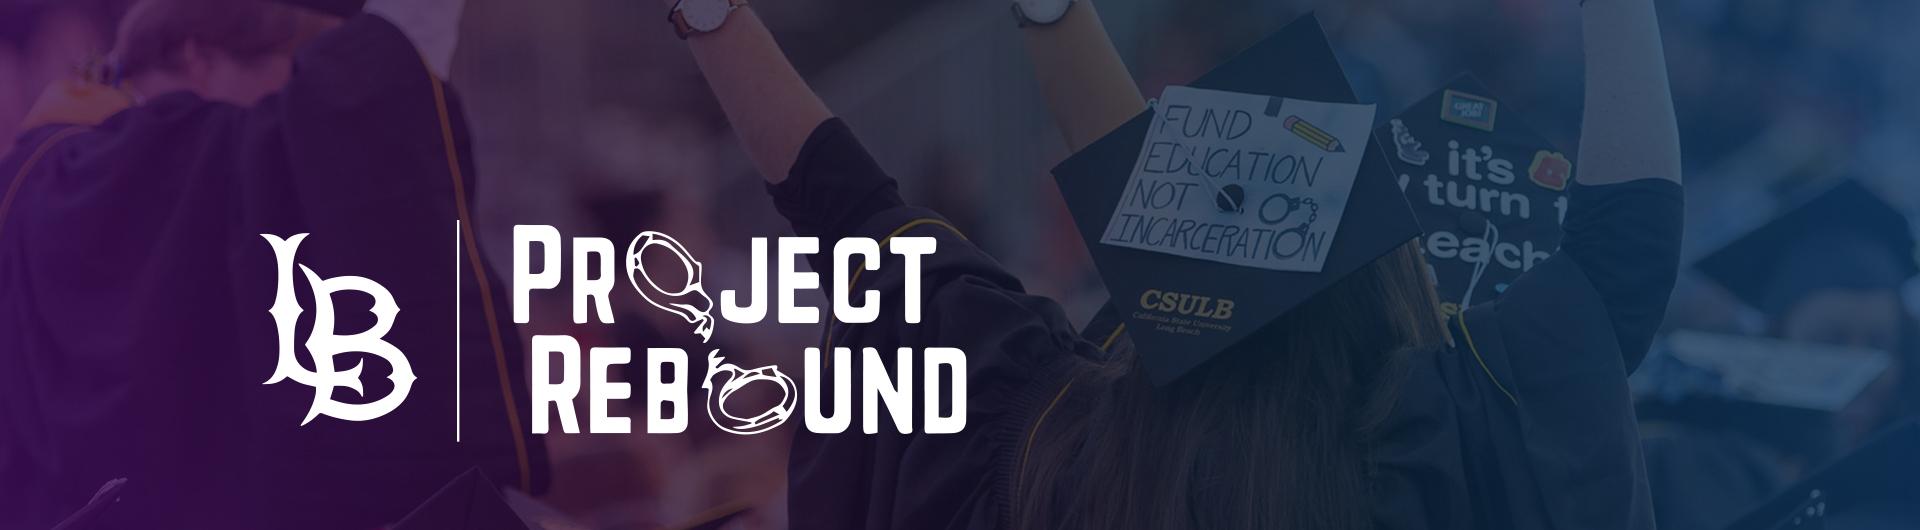 Banner for Project Rebound